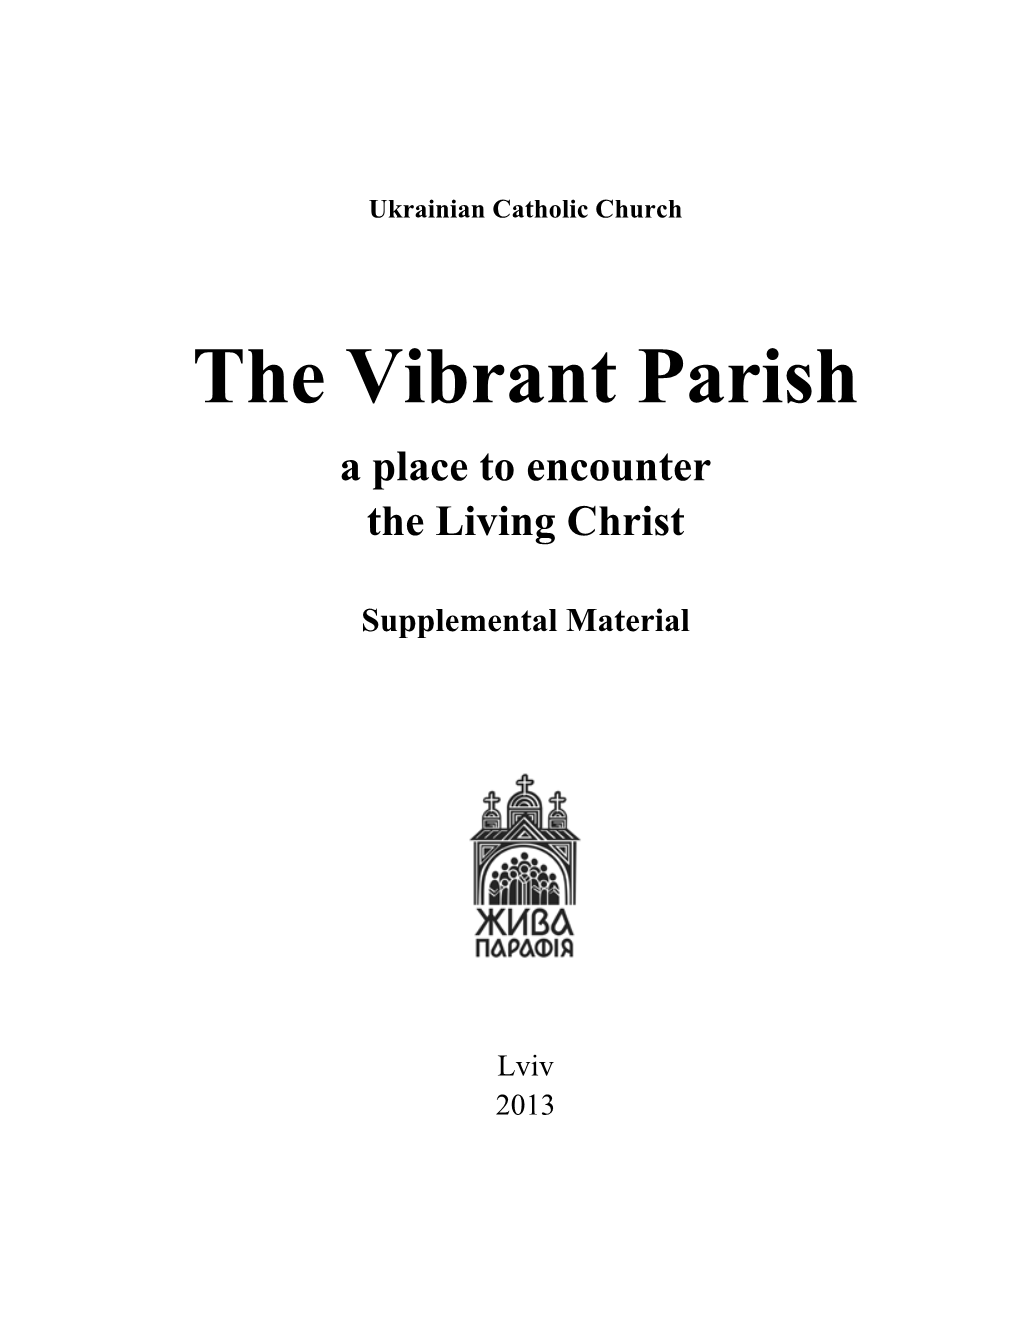 The Vibrant Parish a Place to Encounter the Living Christ